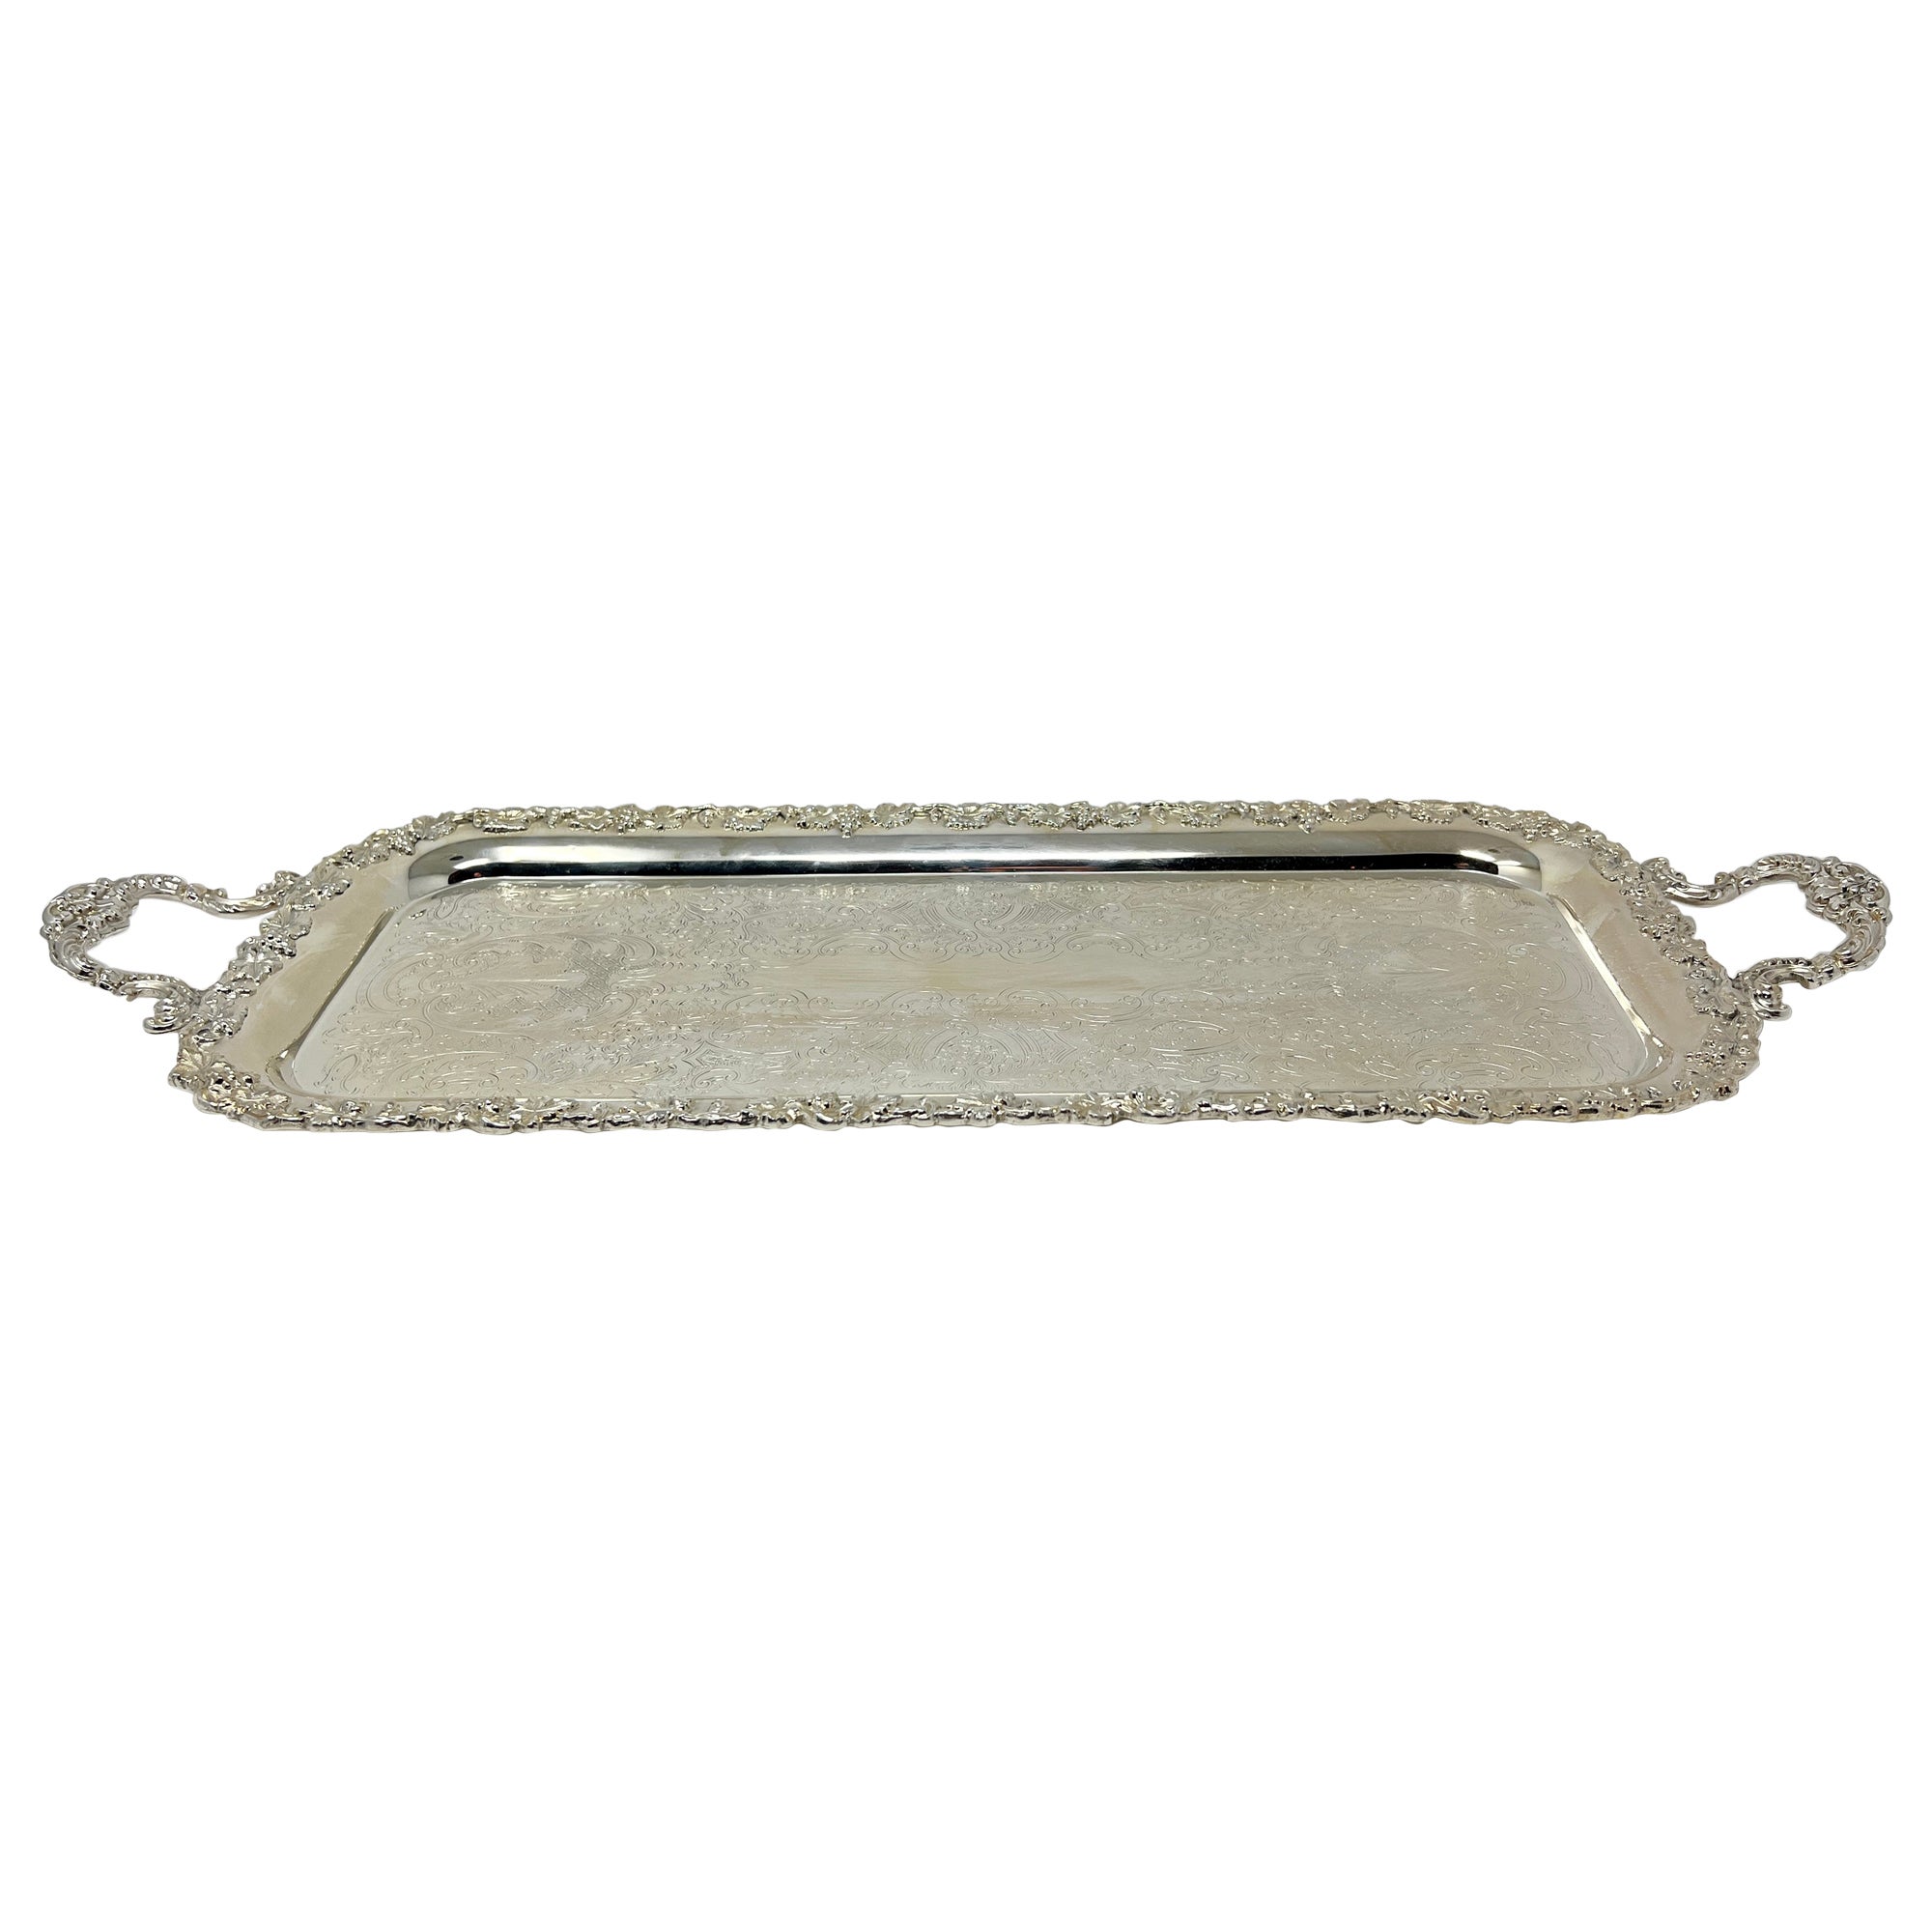 Antique English Sheffield Silver Plate Drinks Tray, Circa 1900.